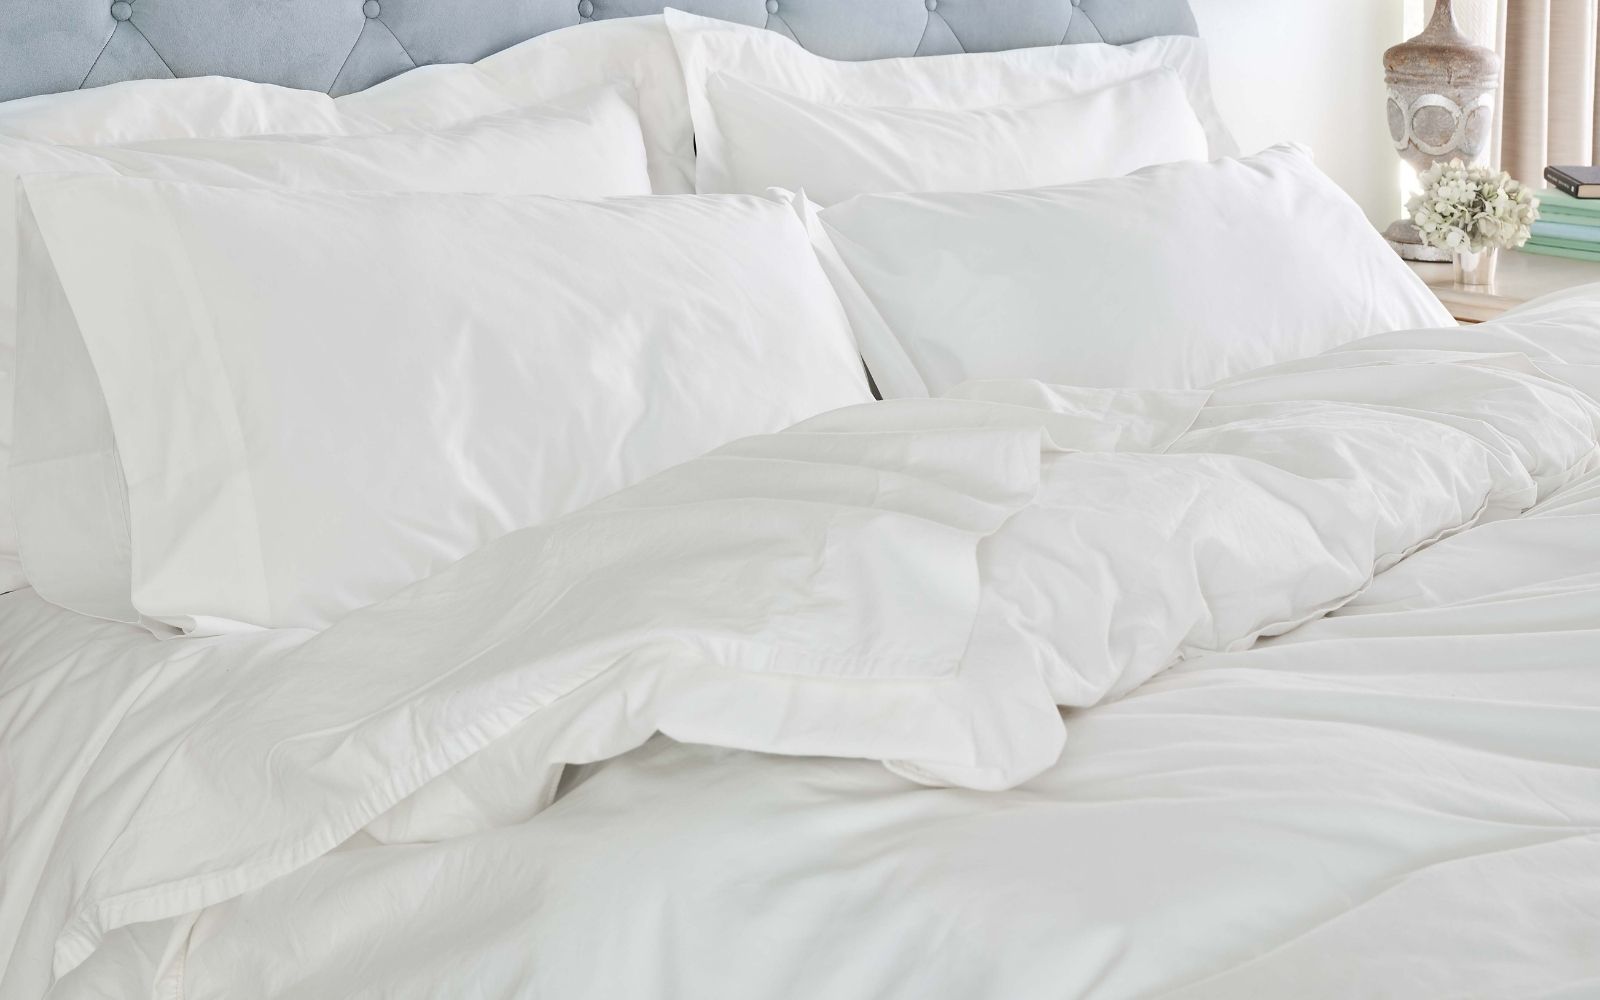 Wrinkled percale bedding